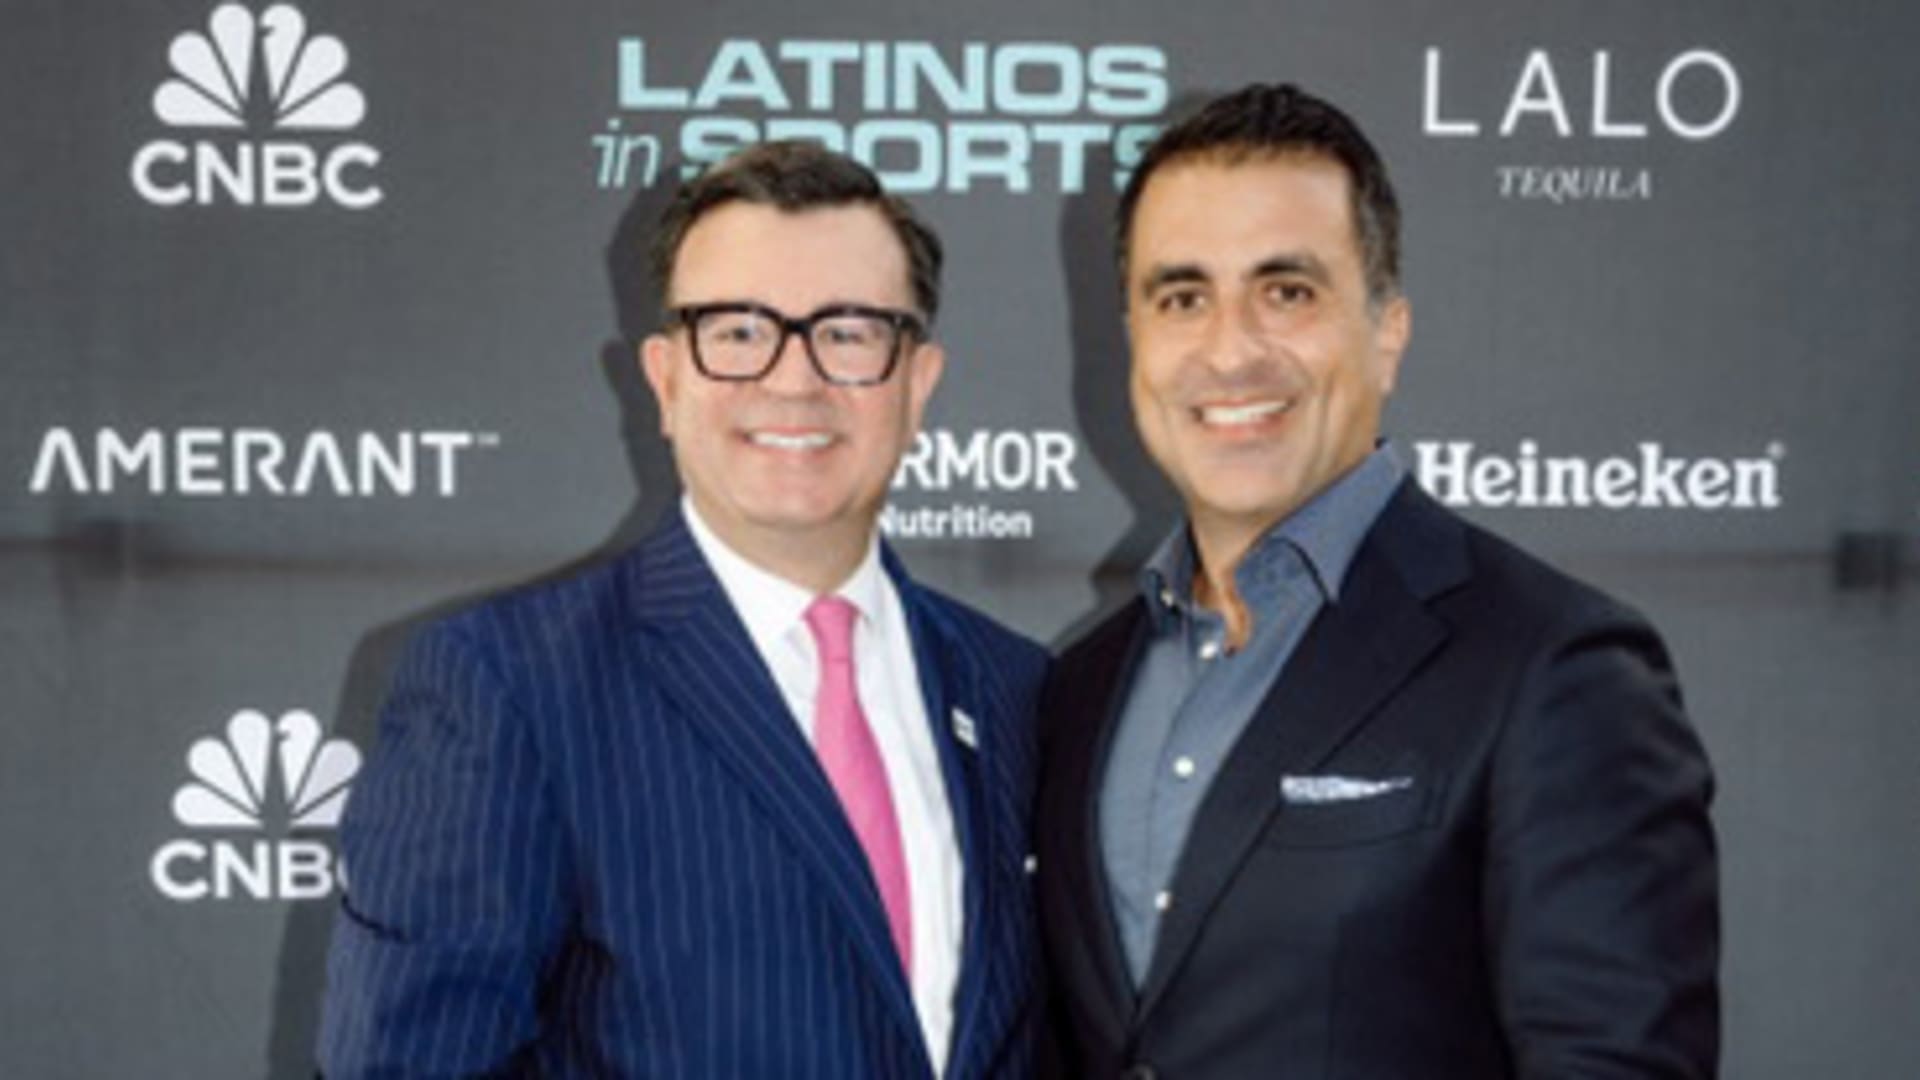 NHL CEO, other Latino executives found Latinos in Sports platform